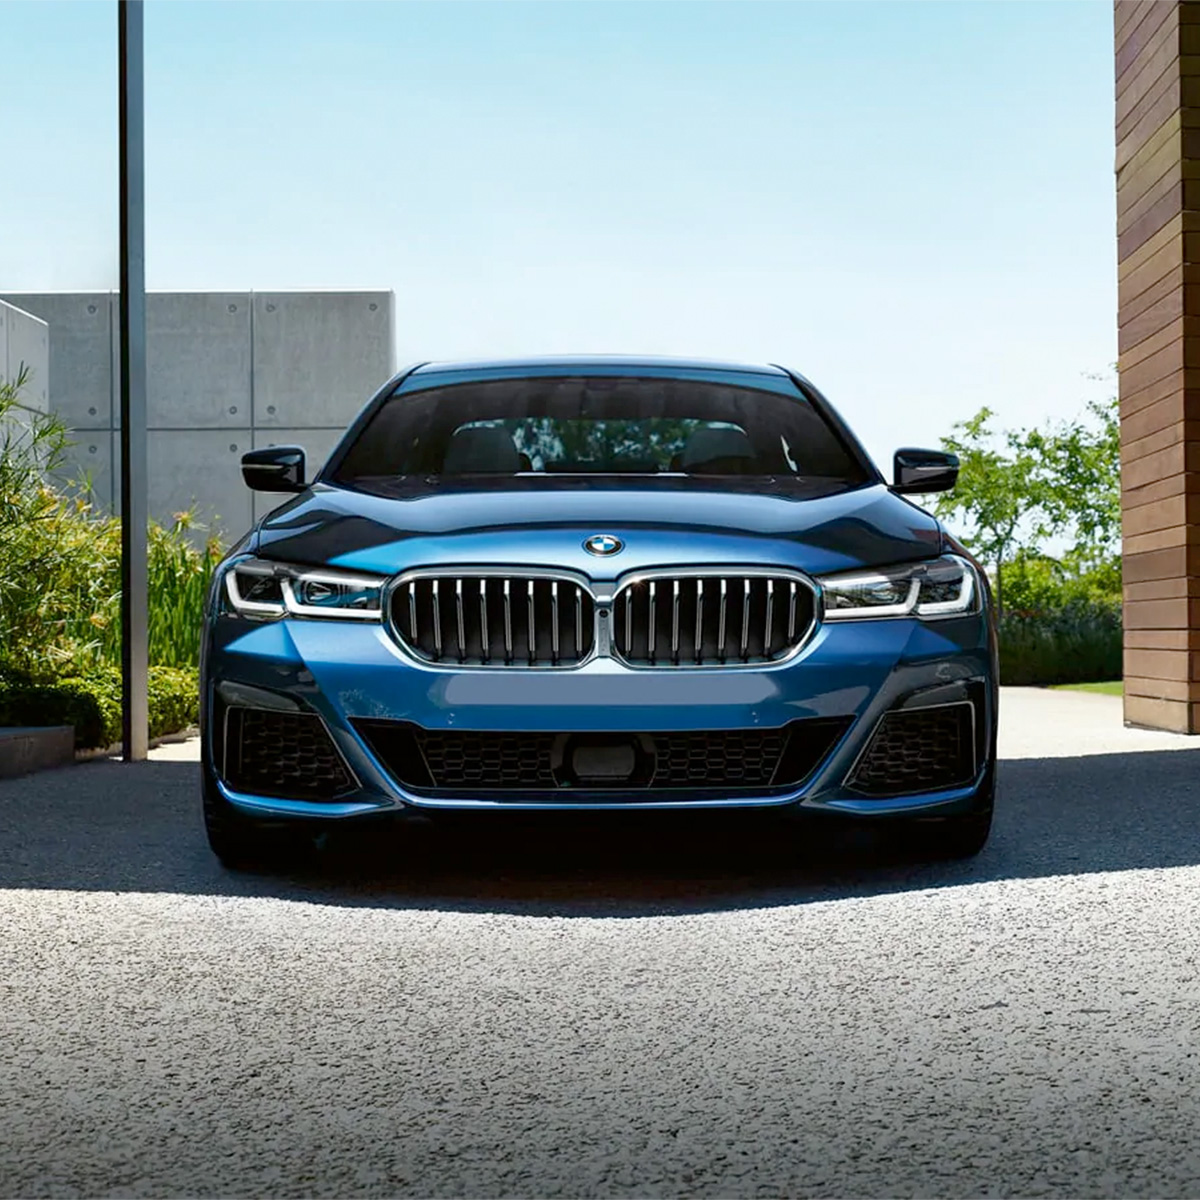 Front view of blue 2021 BMW 5 Series parked